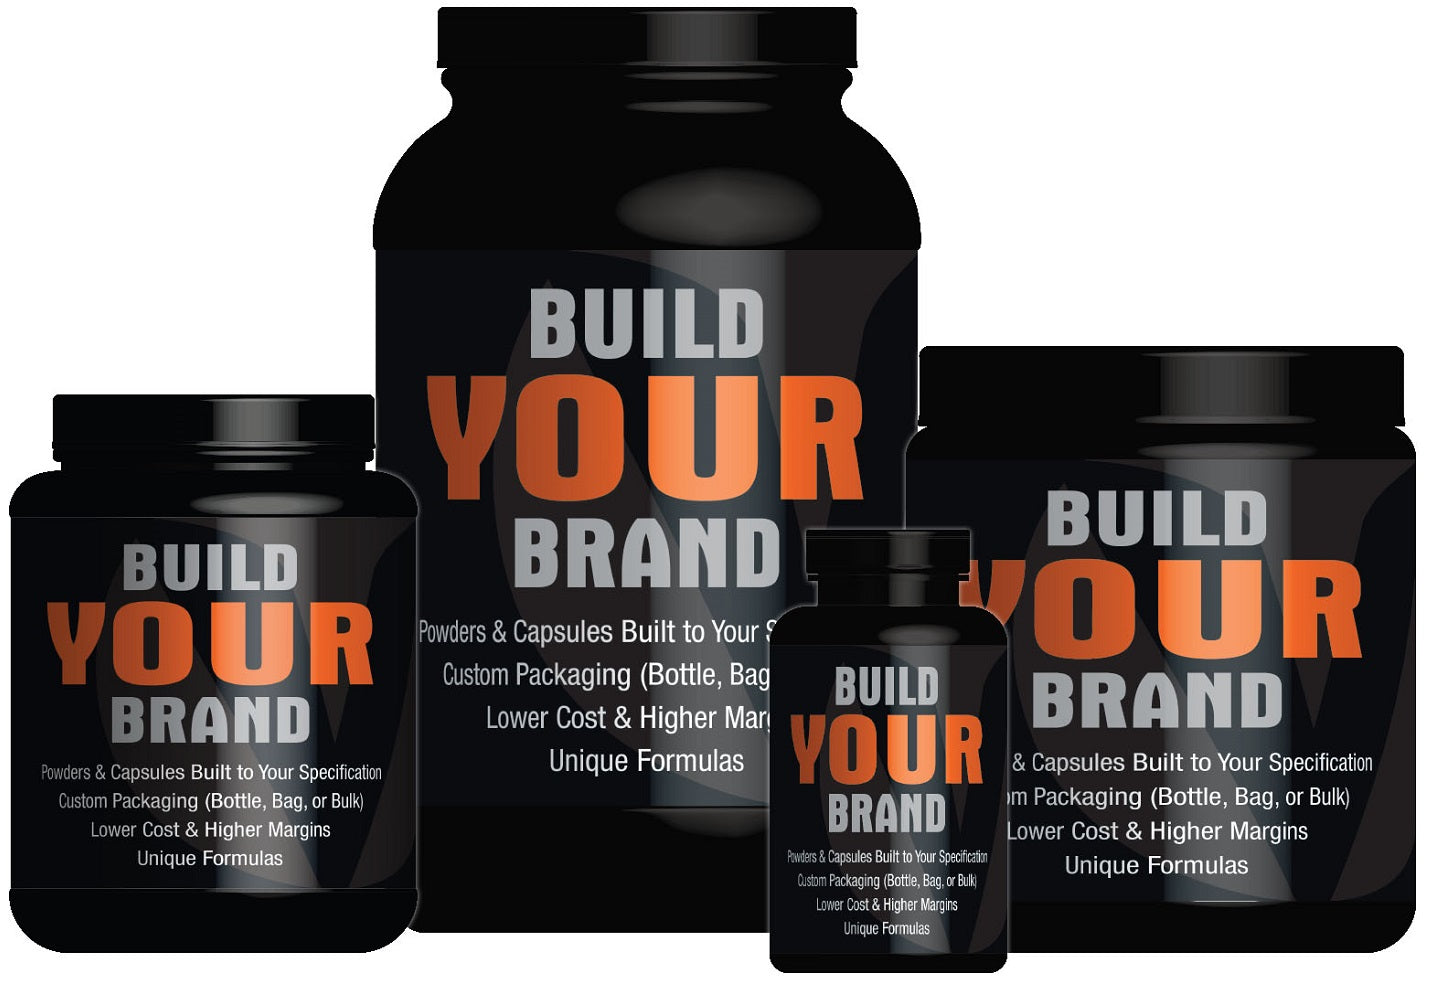 Four black plastic canisters of different sizes with "Build Your Brand" labels